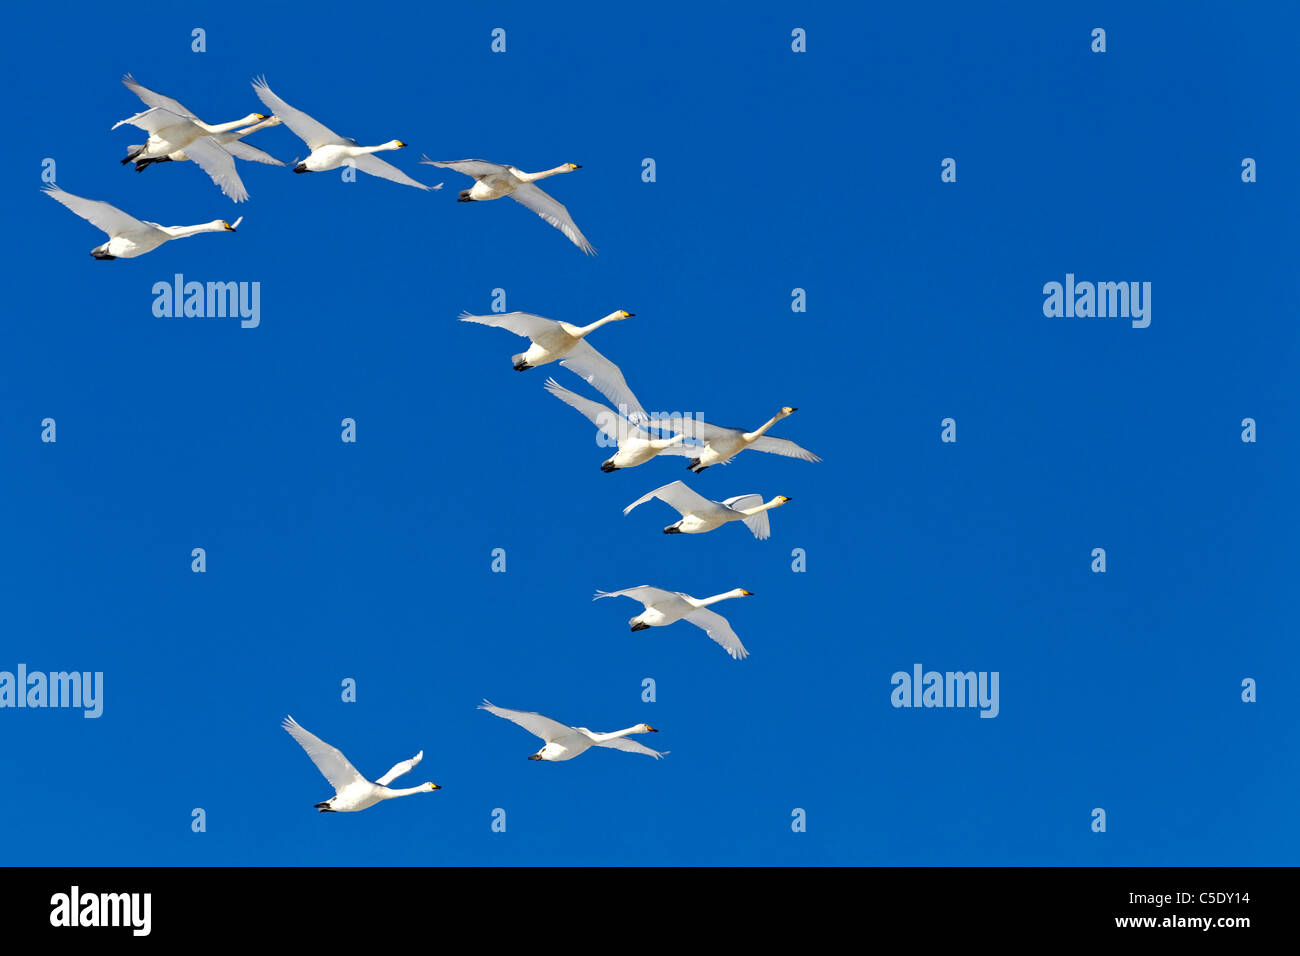 Low angle view of whooper swans flying in formation against the clear blue sky Stock Photo